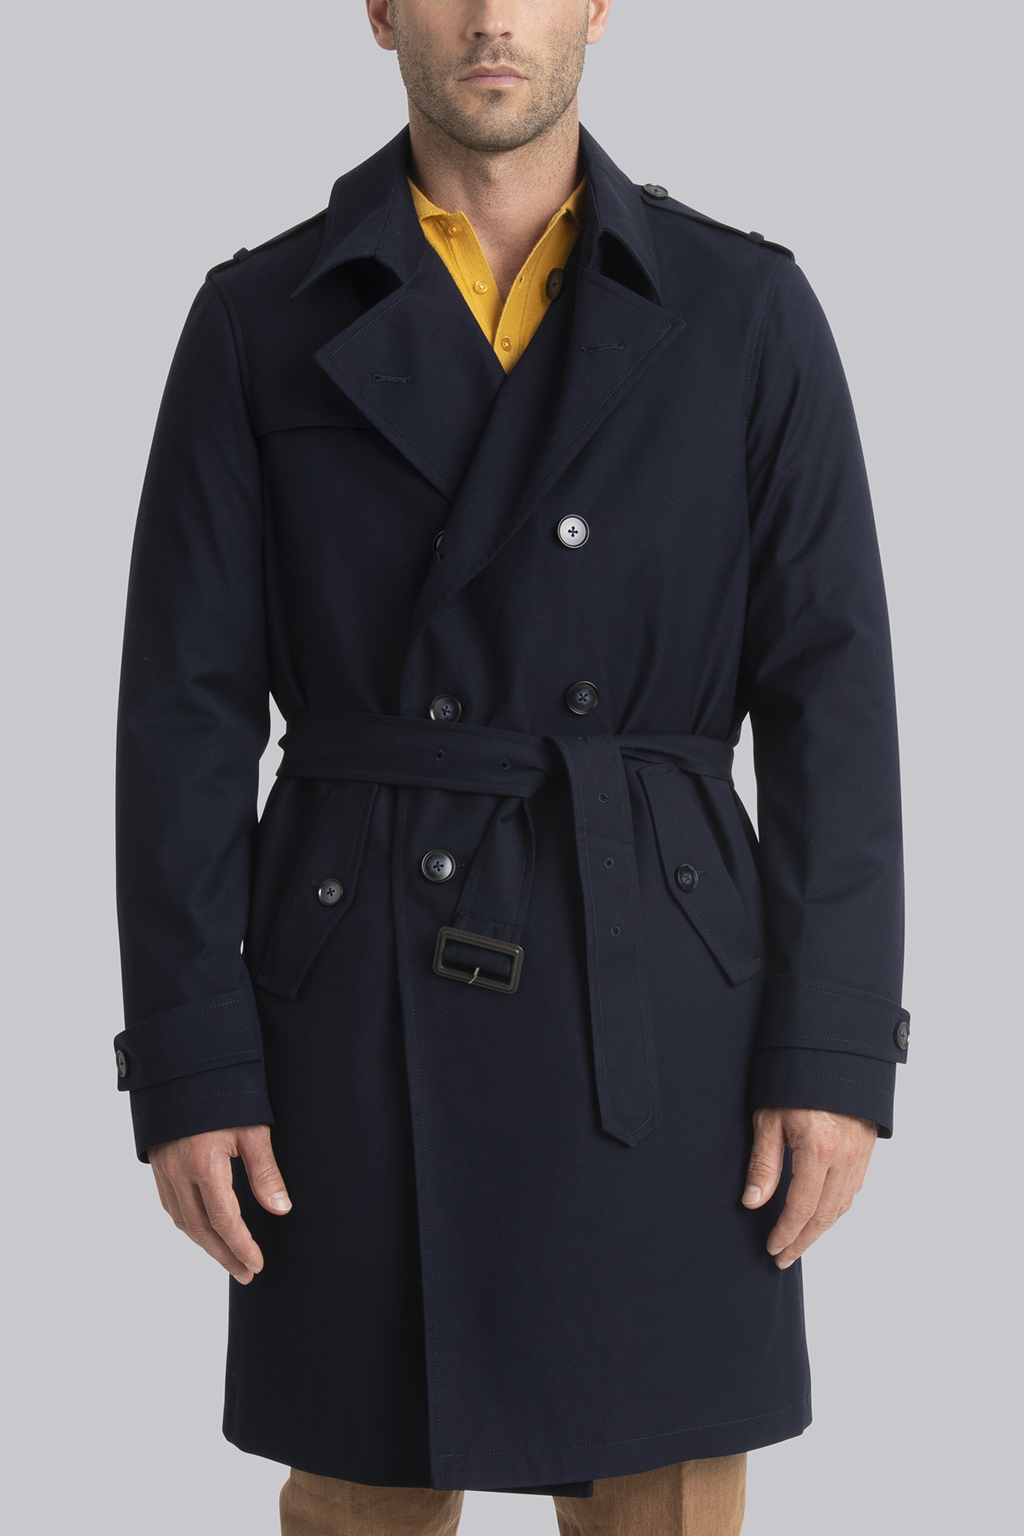 Cardinal of Canada | Fall Winter Outerwear and Overcoat Collection ...